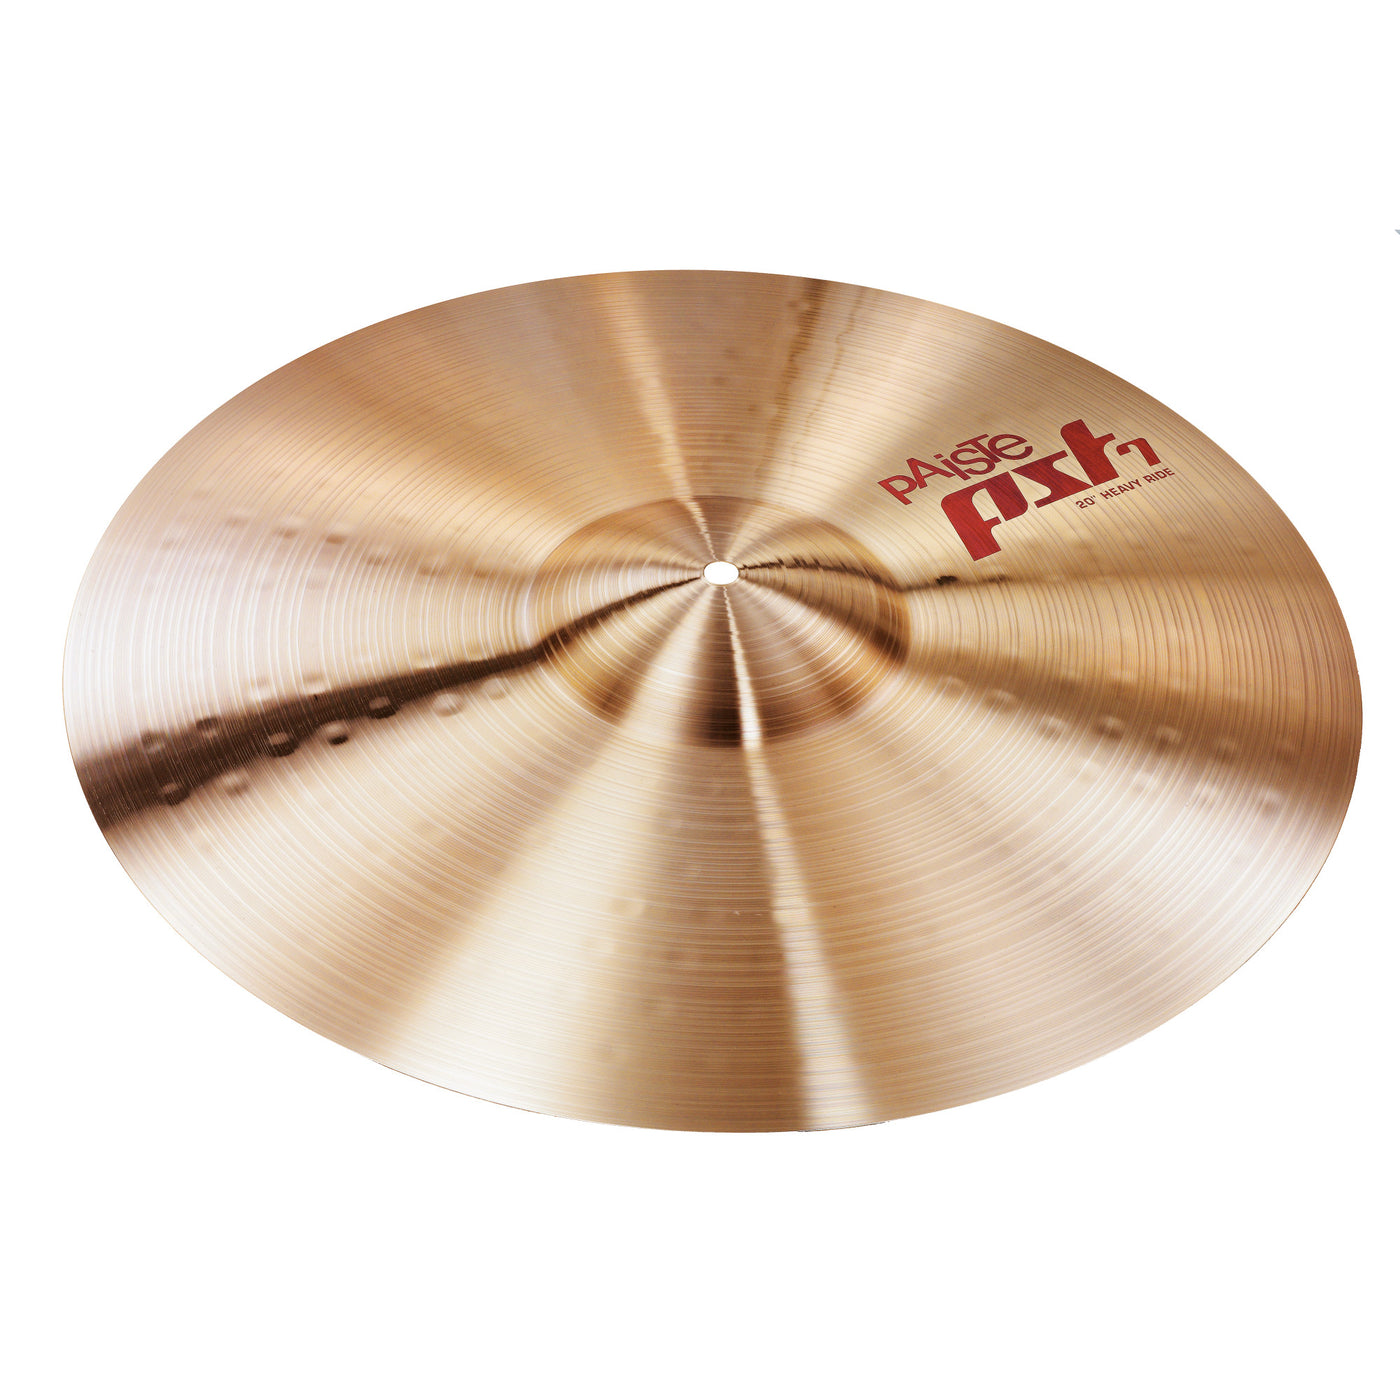 Paiste Heavy Ride Cymbal, PST 7 Series, Percussion Instrument for Drums, 20"